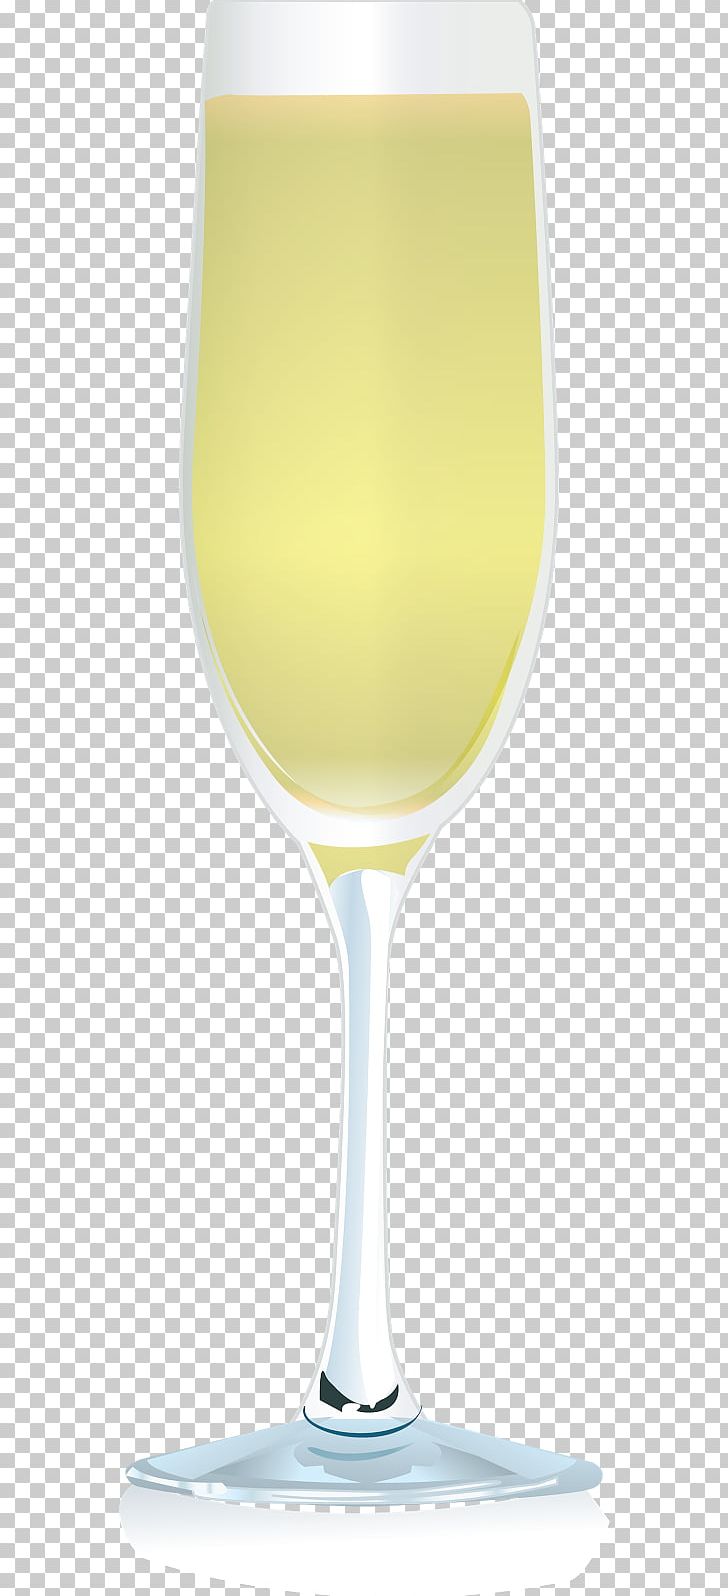 Wine Glass White Wine Champagne Glass PNG, Clipart, Beer Glass, Beer Glasses, Champagne Glass, Champagne Stemware, Drink Free PNG Download